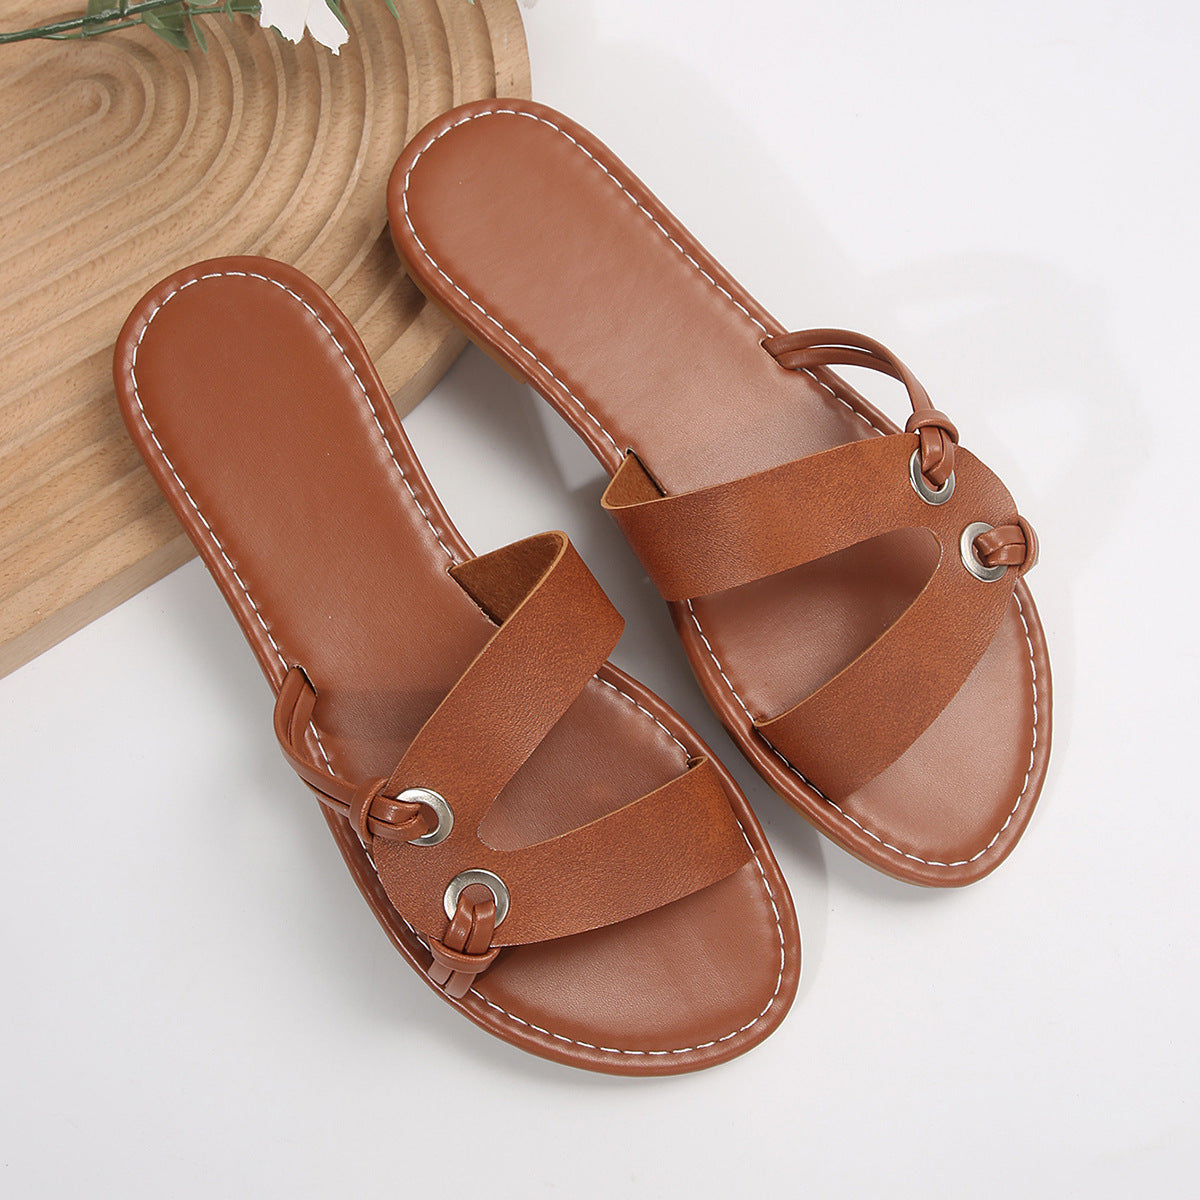 Round Toe Flat Sandals Summer Fashion Casual Non-slip Slides Shoes For Women Shoes & Bags